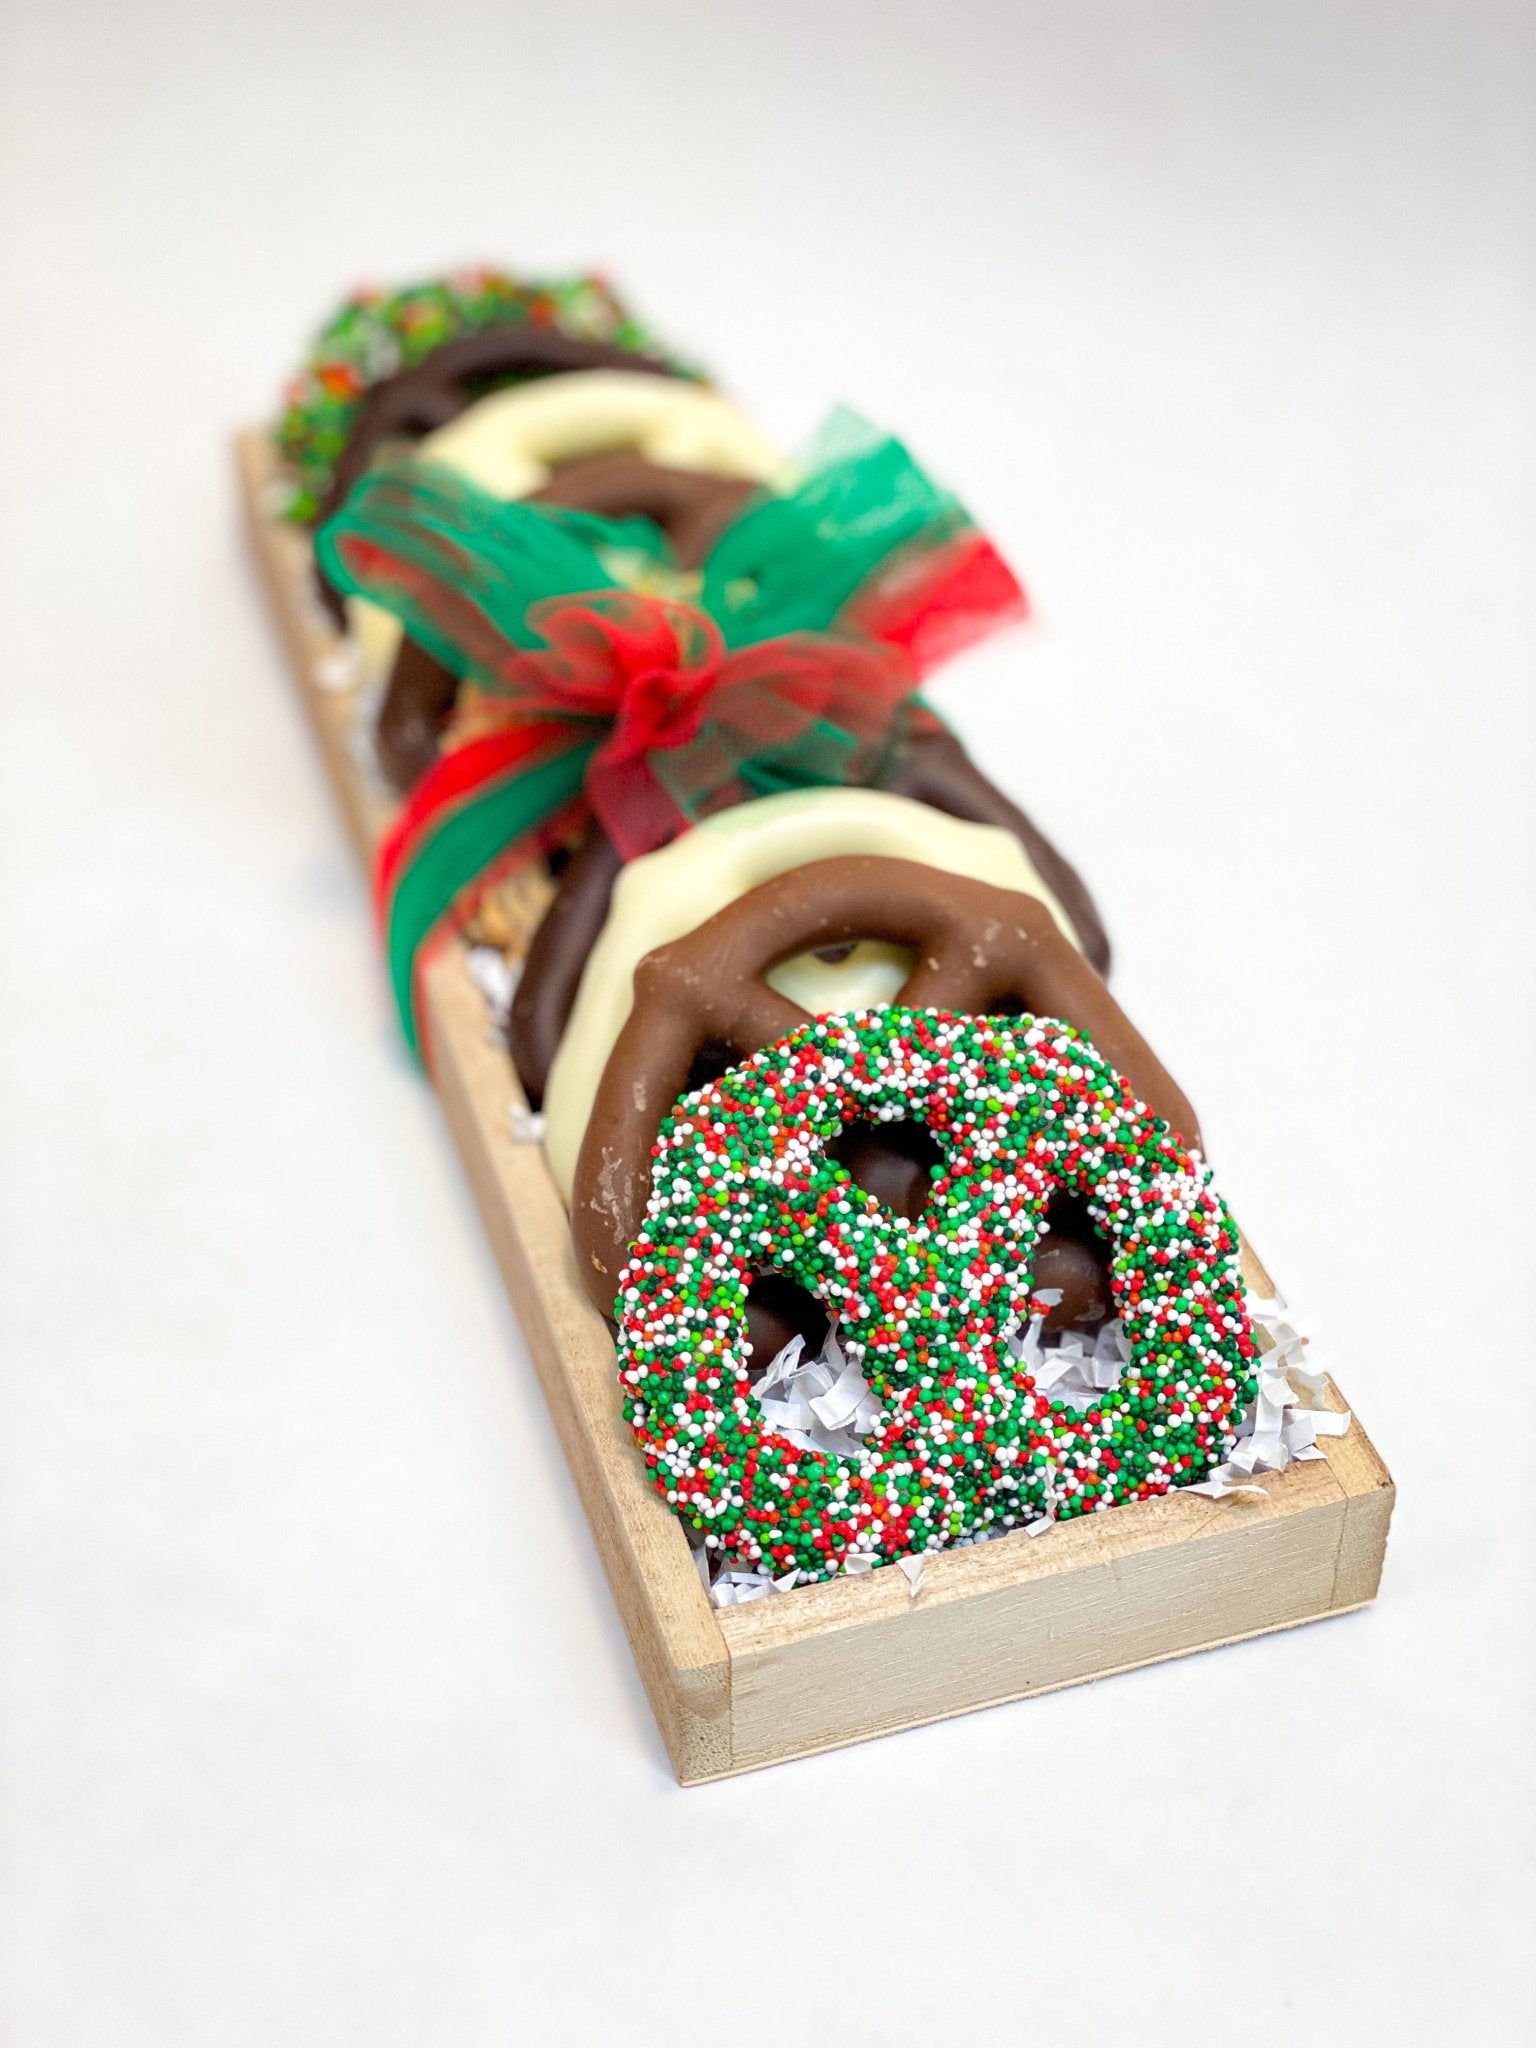 Holiday Gourmet Pretzel TrayChocolate Covered Pretzel GiftA nice presentation of gourmet chocolate covered pretzels. Affordable as a gift for virtually any person or occasion. 
Same Day Delivery Available